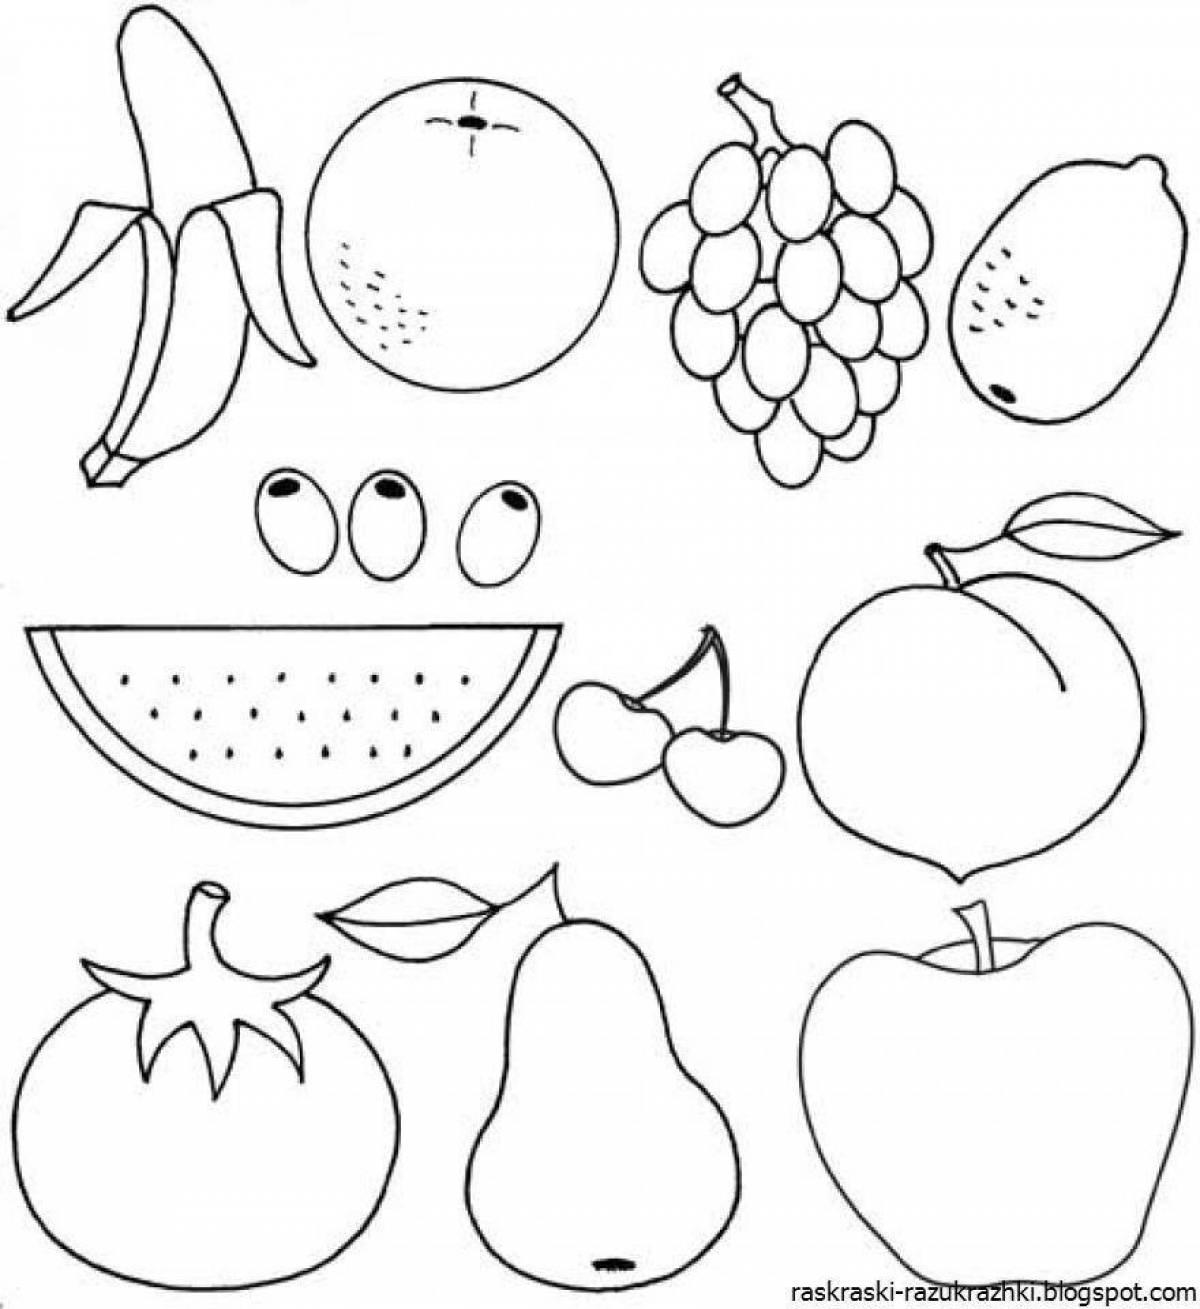 Colorful and vibrant fruits and vegetables coloring book